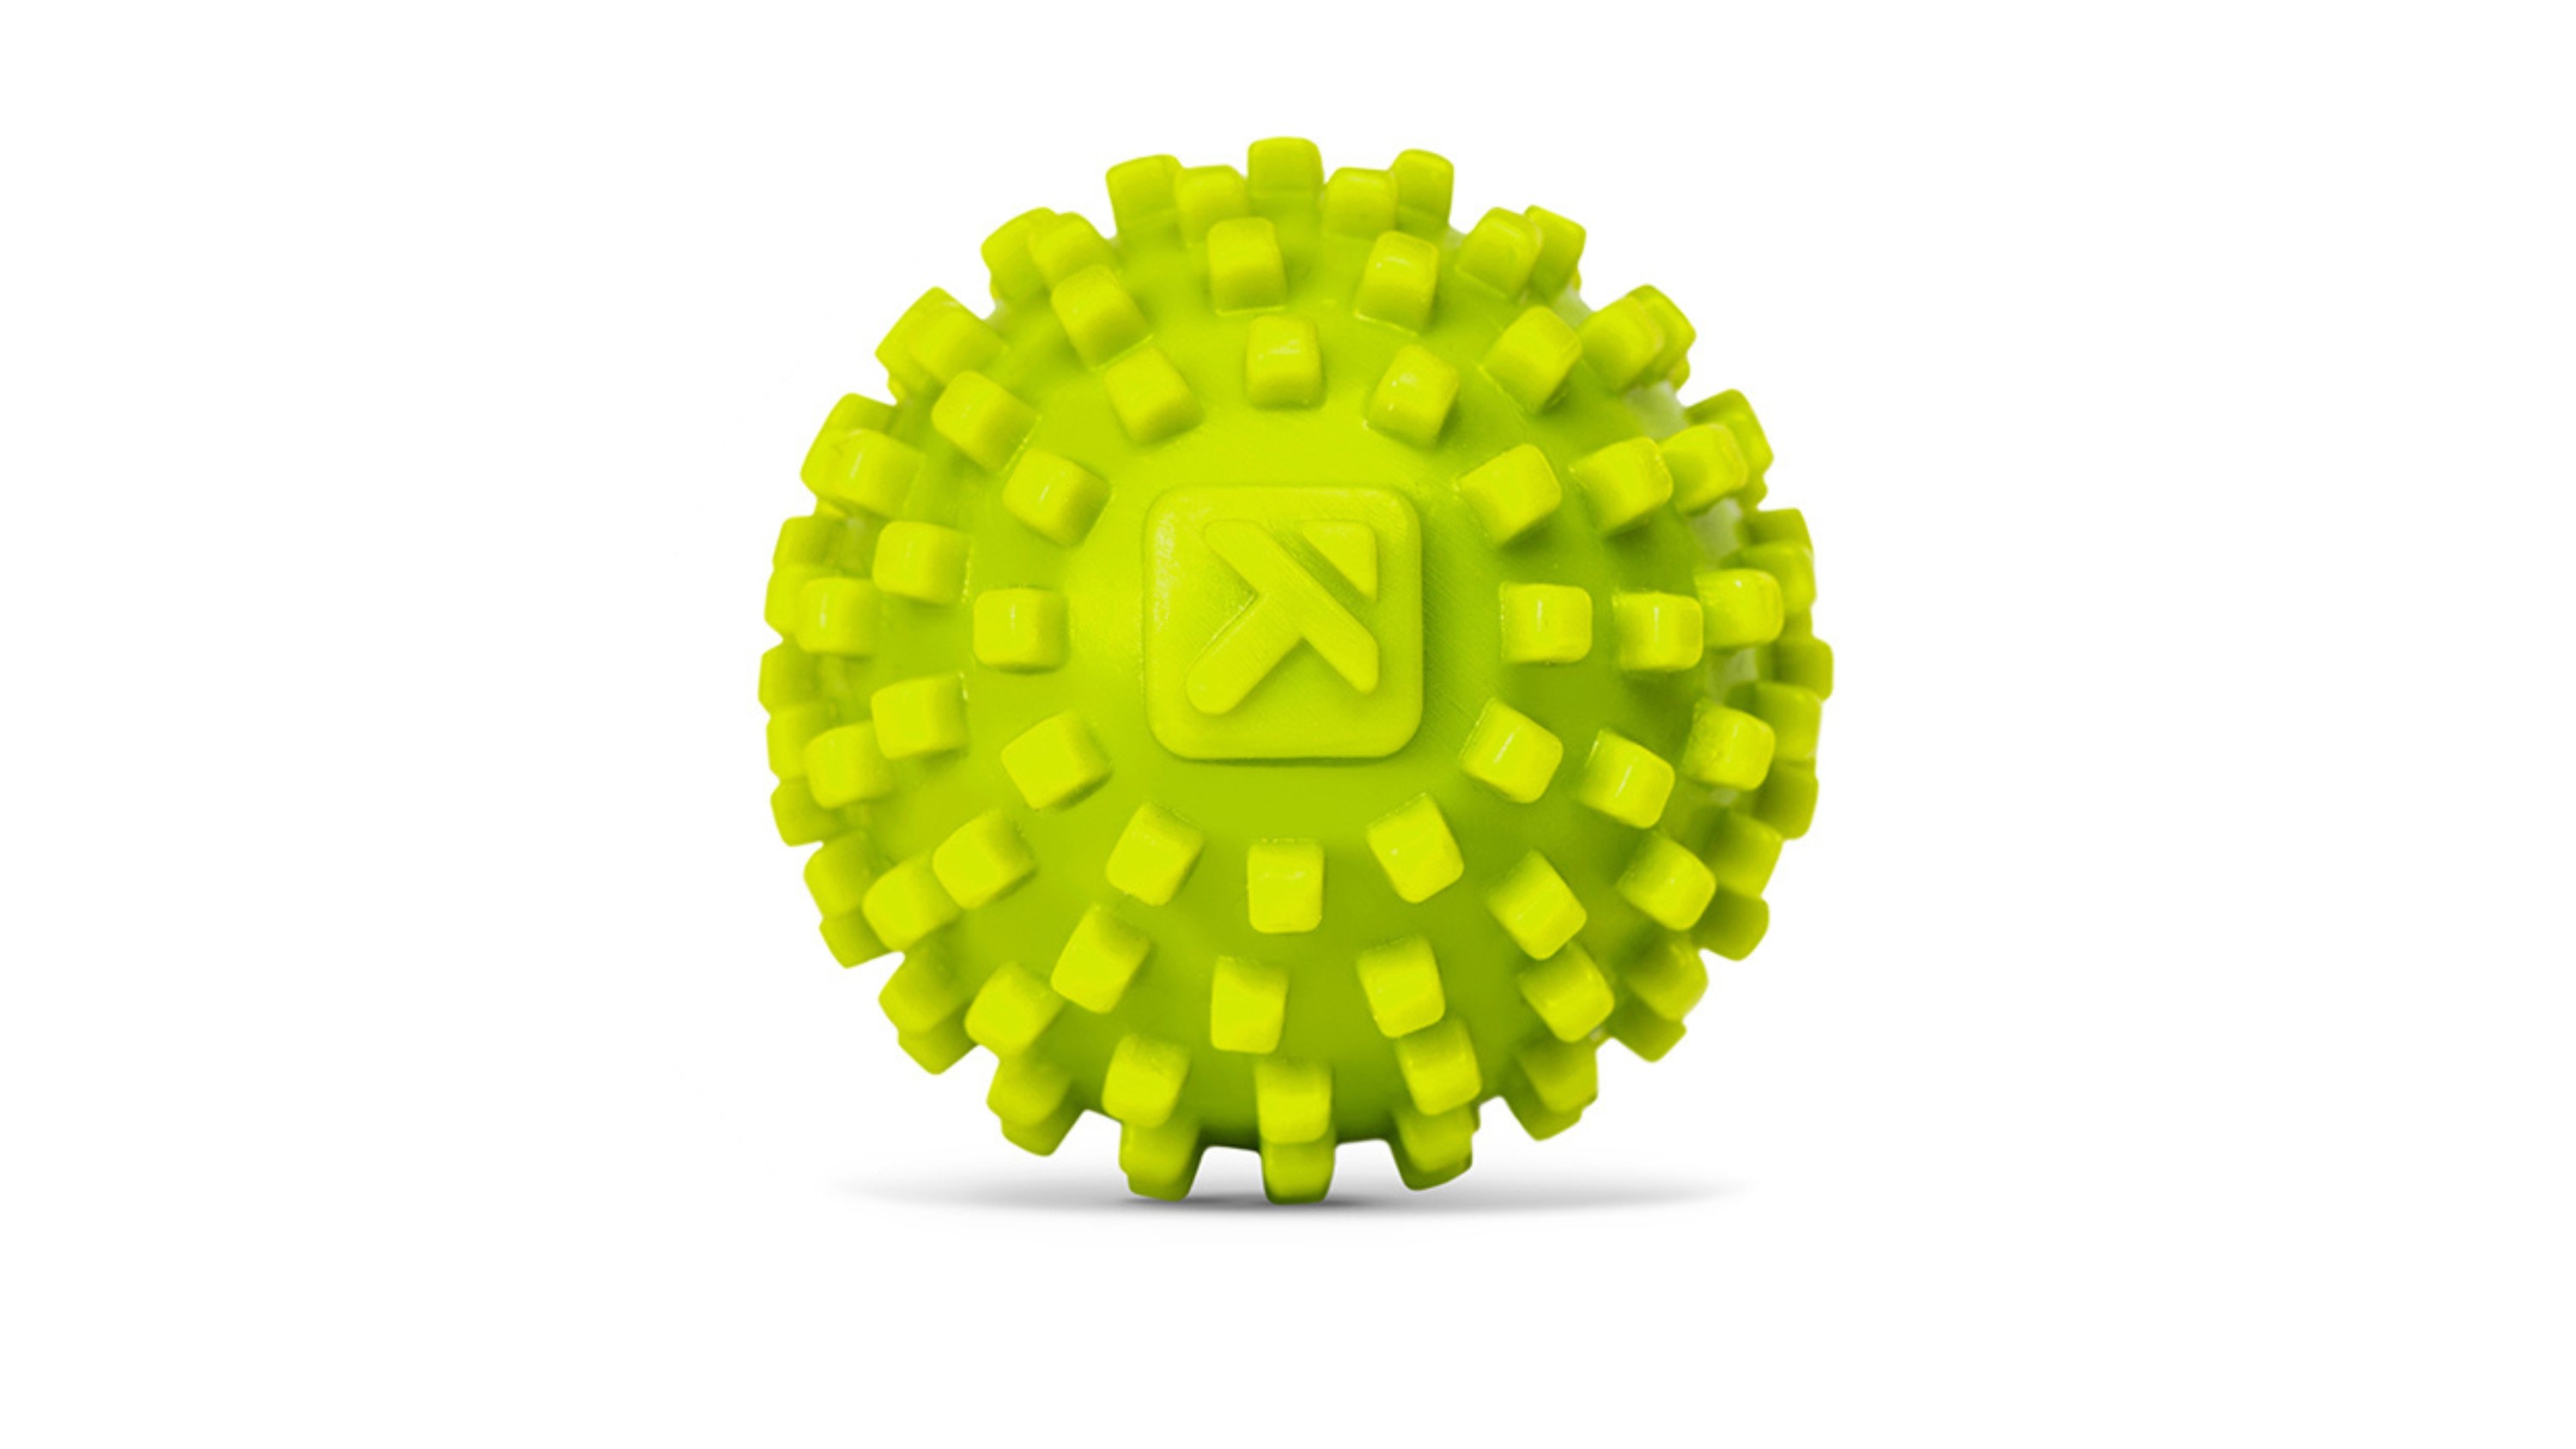 With this trigger point ball you reduce stiffness and increase the mobility of various joints.